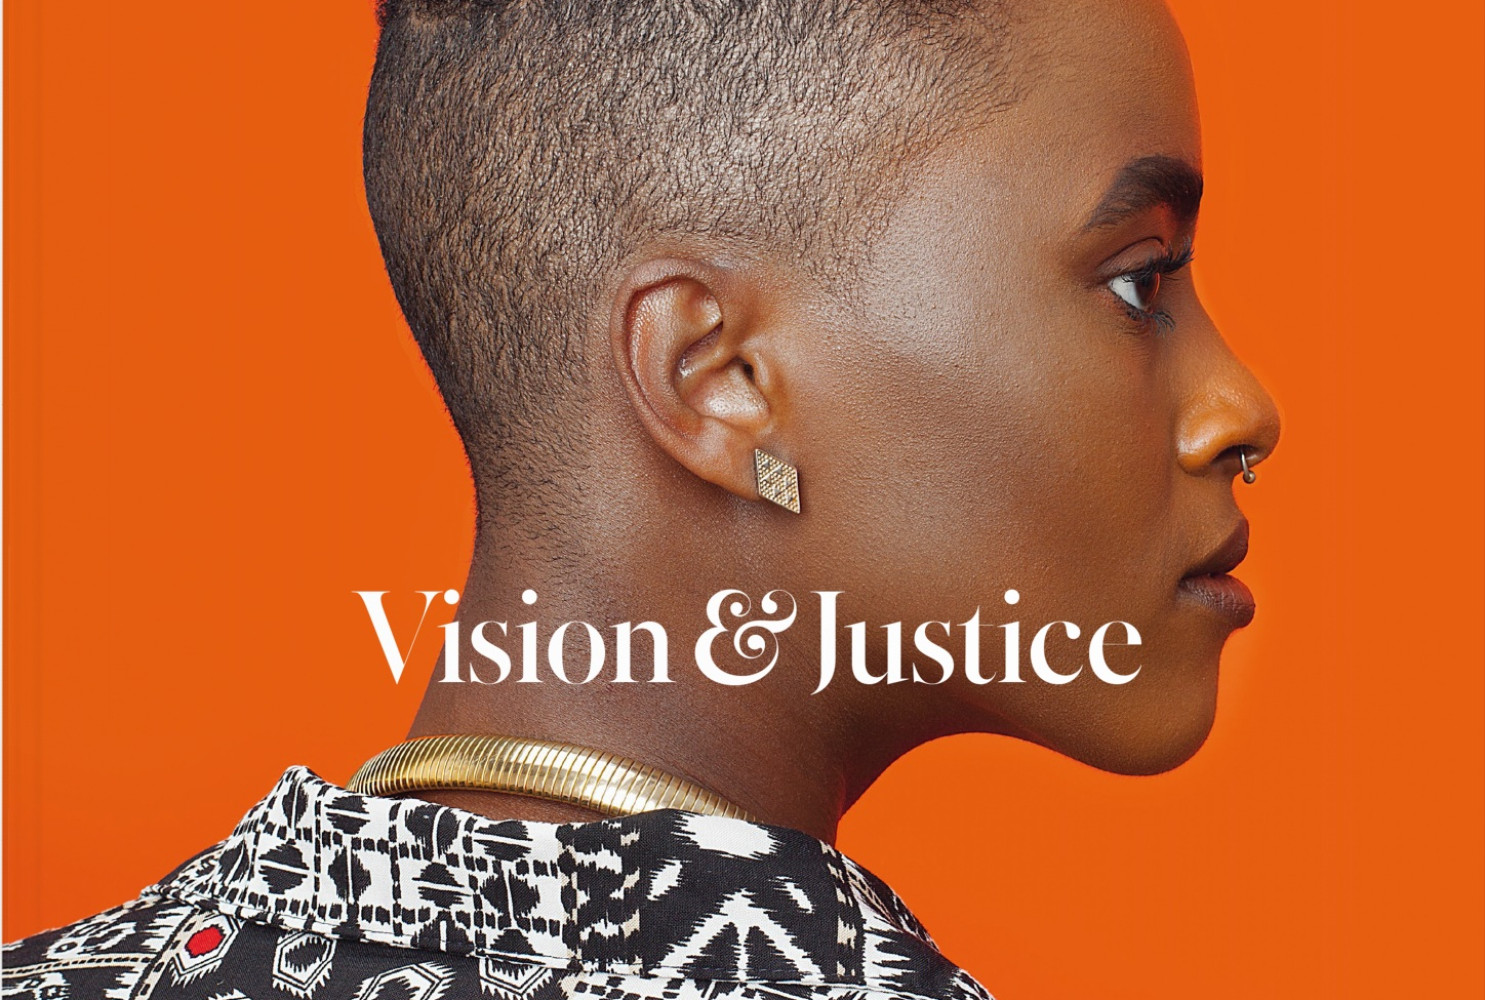 Cover, The Vision & Justice Issue Of Aperture, featuring an image by Awol Erizku, Untitled (Forces of Nature #1), 2014.